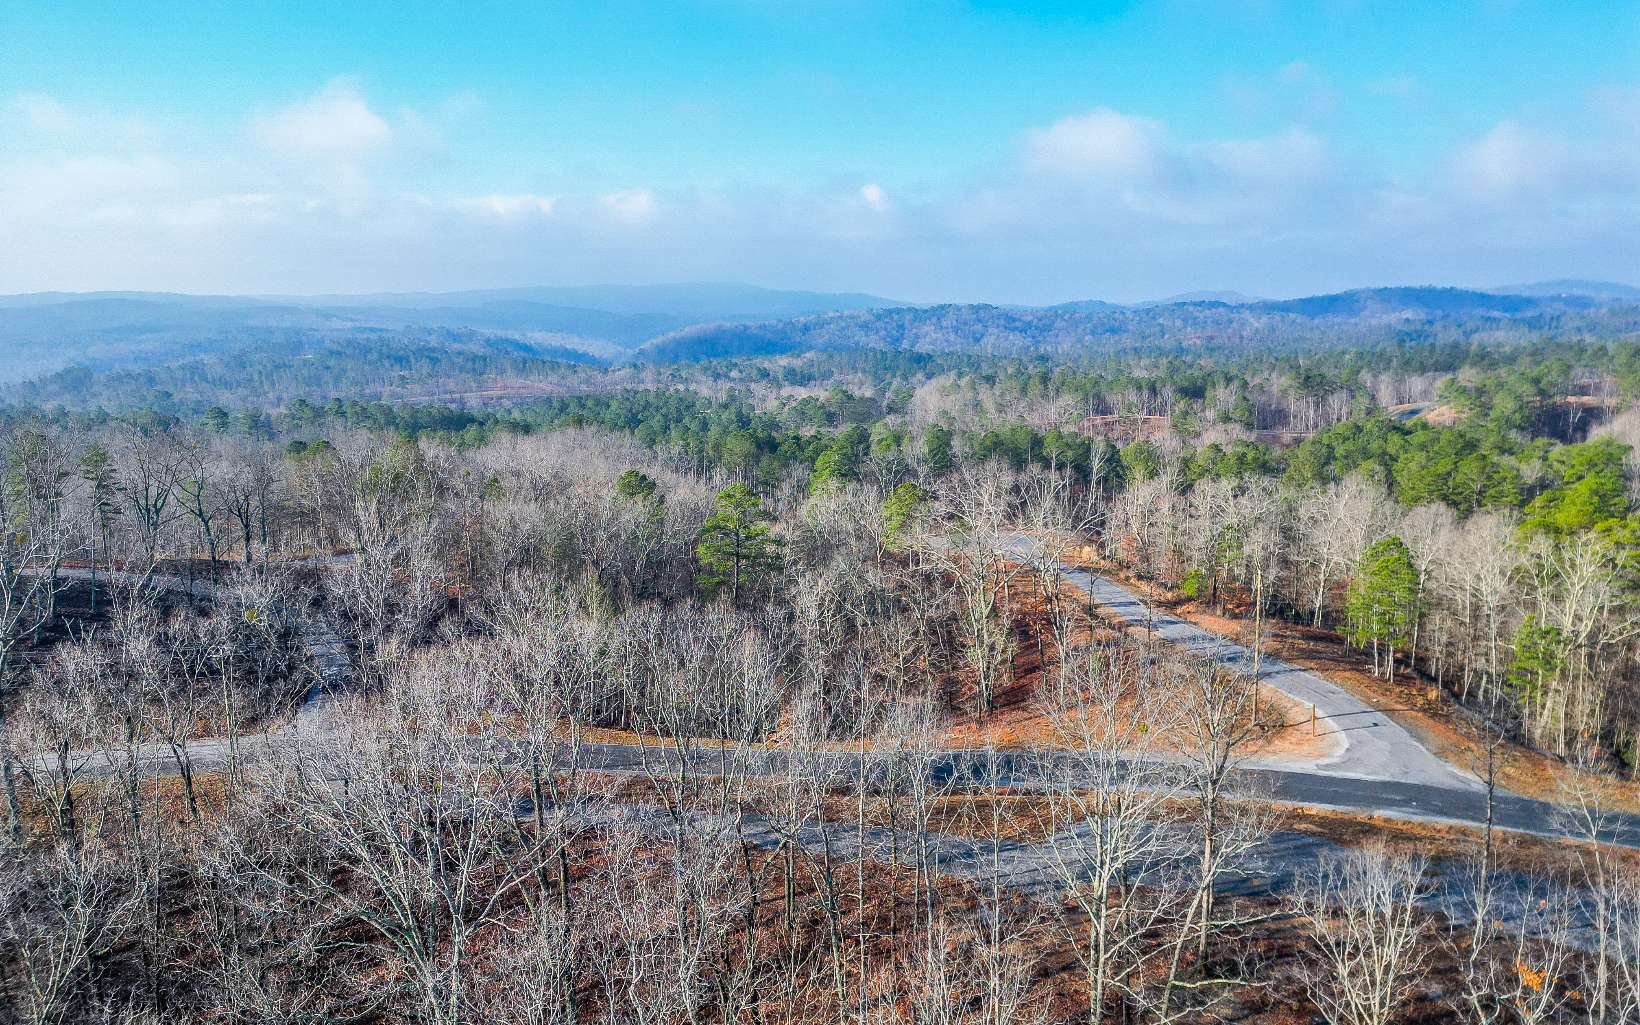 Beautiful Year-round mountain views can be had at this spacious 3.31 acre lot. From this central location you can be in either Ellijay, Jasper or Chatsworth in about 15 min. There is a nice gentle house site with the property sloping downward behind it. Gravel drive access is already in. The community of Creekside Crossing offers a gated entrance, lots of hiking and ATV trails and relaxing creekside parks and access on Talking Rock Creek. Seller is unsure of yearly HOA dues and is looking into it.